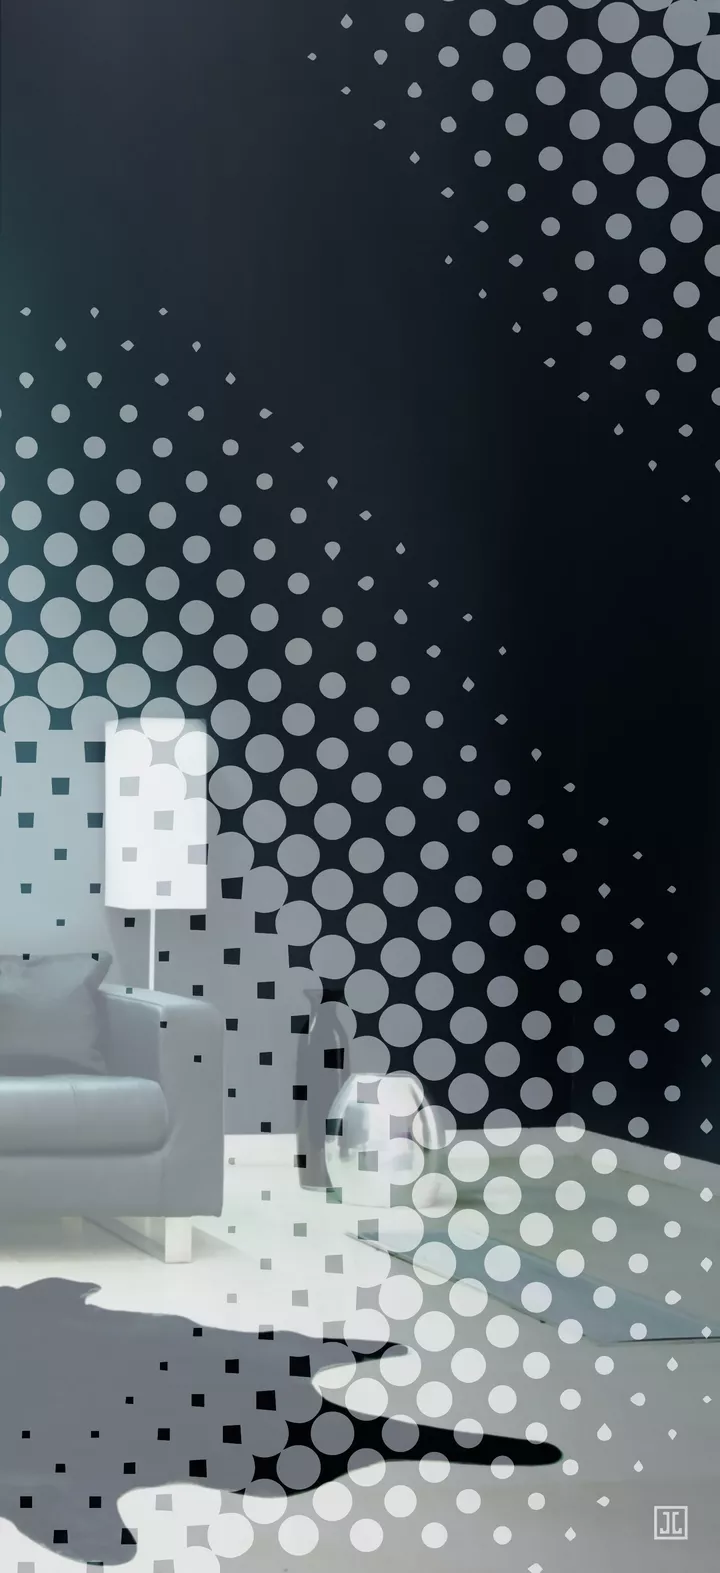 The DOTS design shows a graphical grid-shaped course that divides the surface with generous, vivid points.